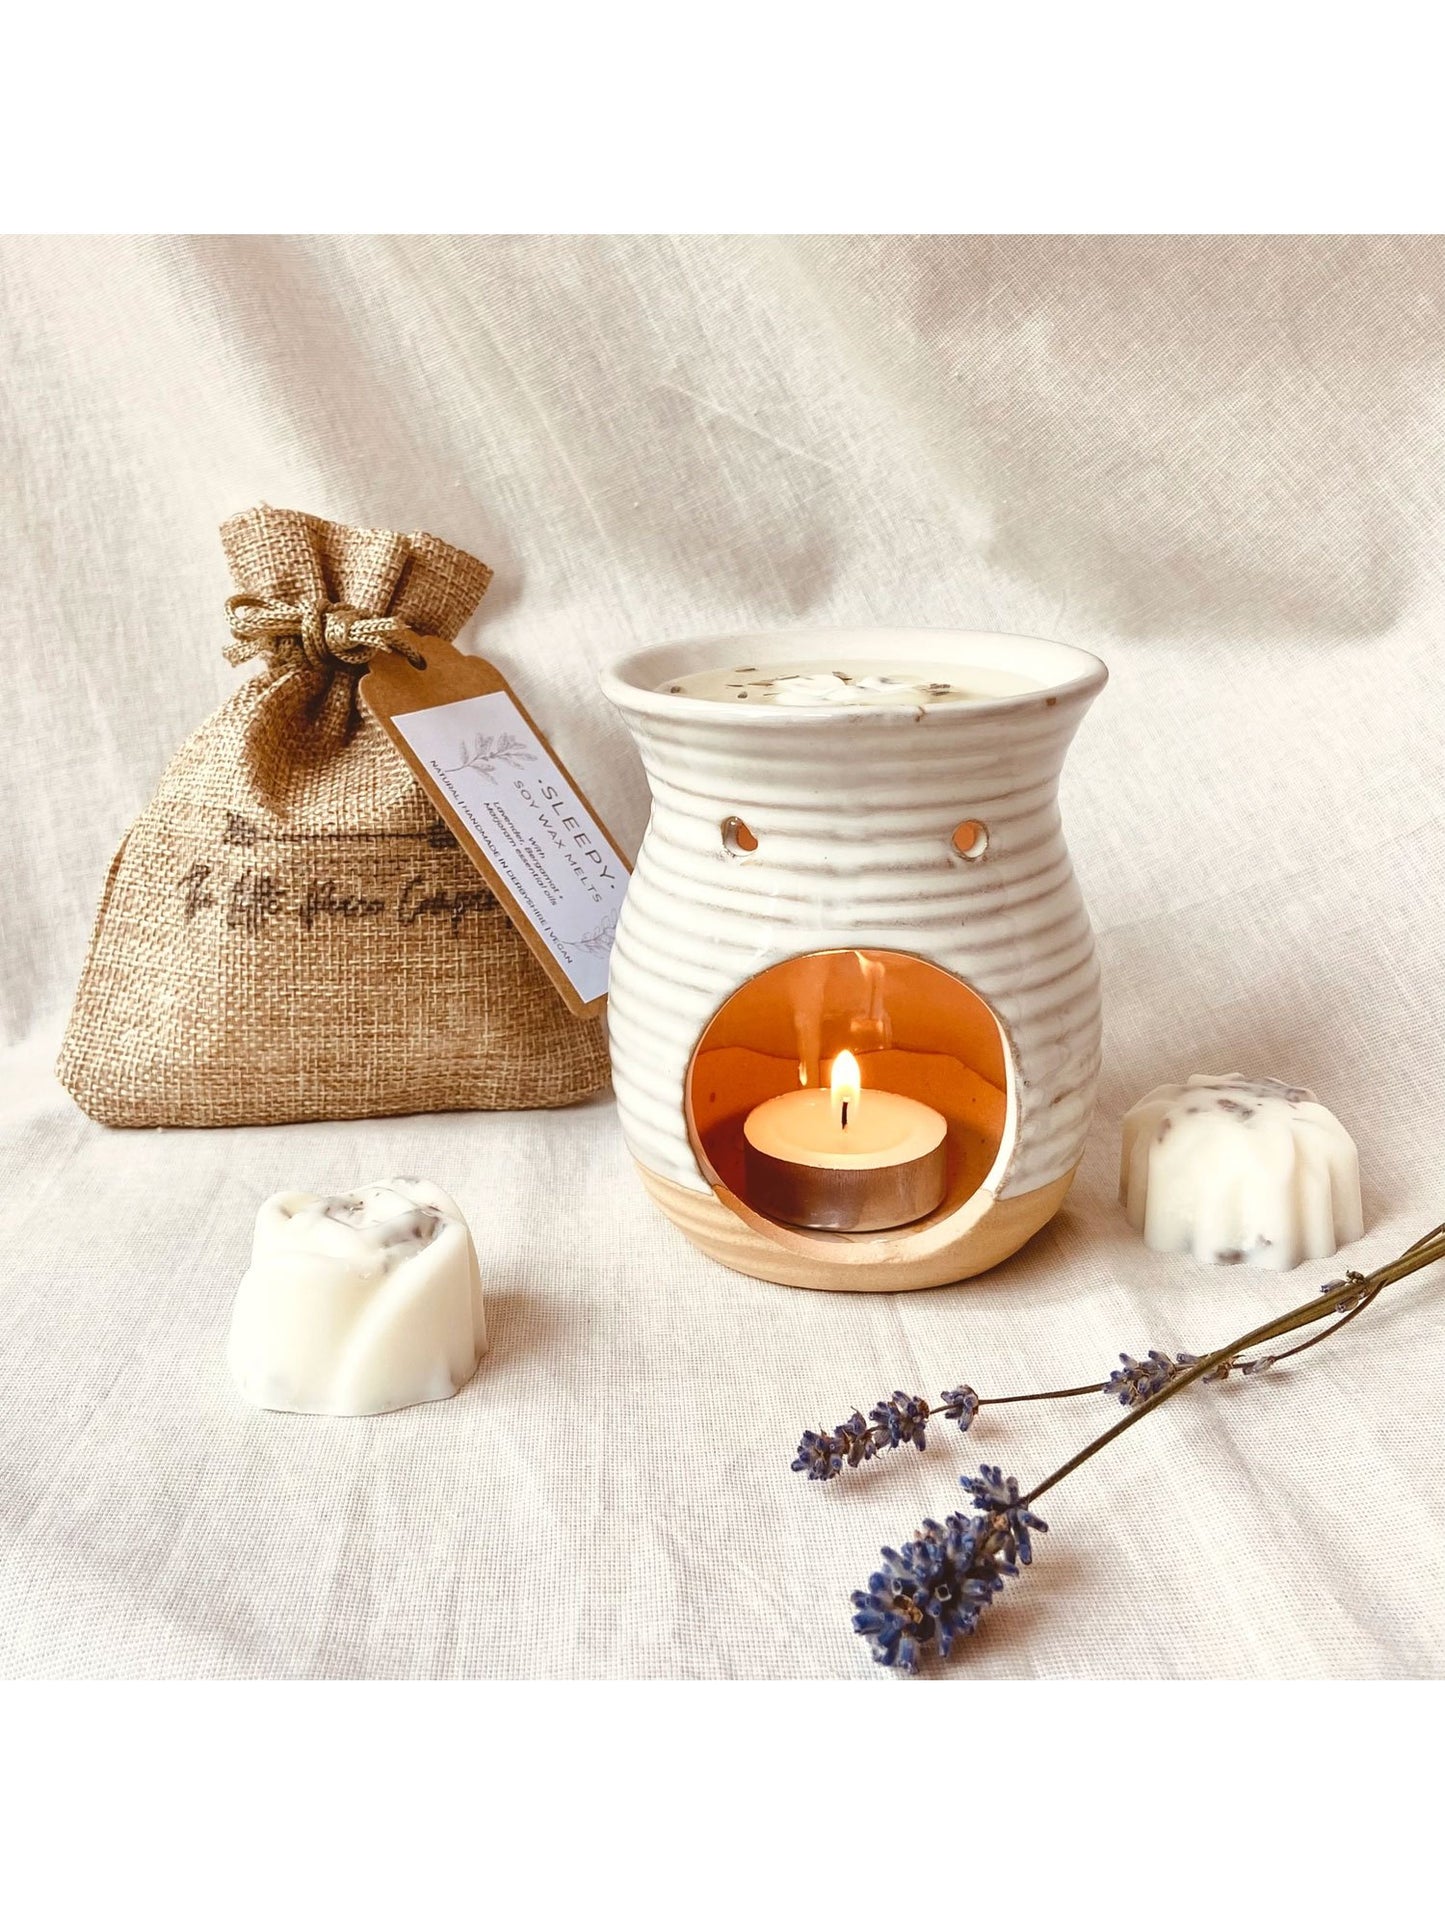 The Little Peace Company Aromatherapy Soy Wax Melts Calming